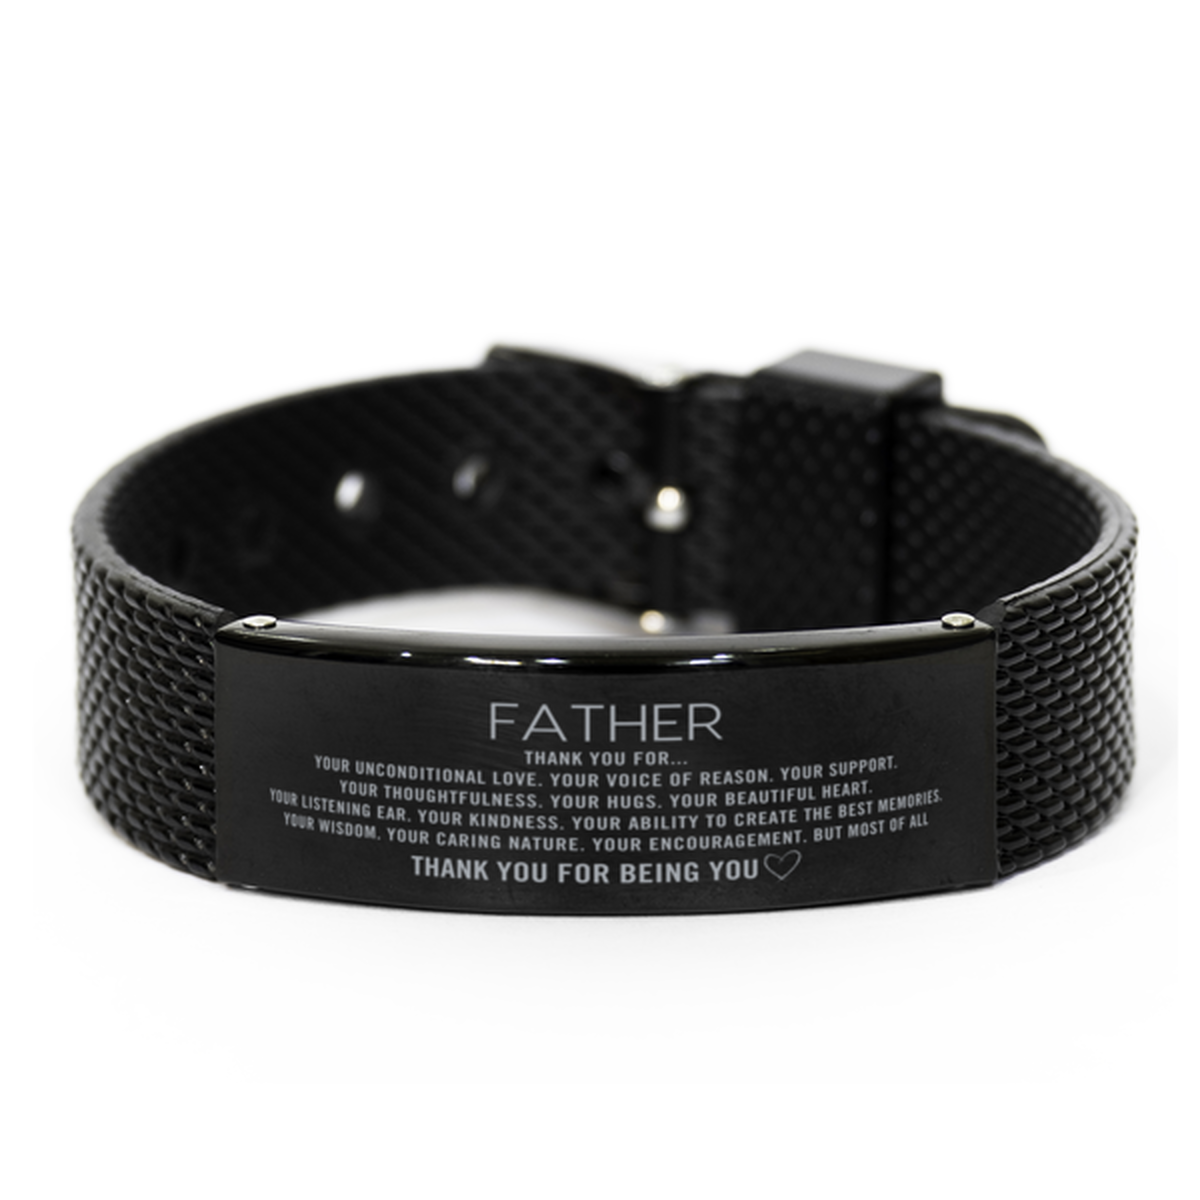 Father Black Shark Mesh Bracelet Custom, Engraved Gifts For Father Christmas Graduation Birthday Gifts for Men Women Father Thank you for Your unconditional love